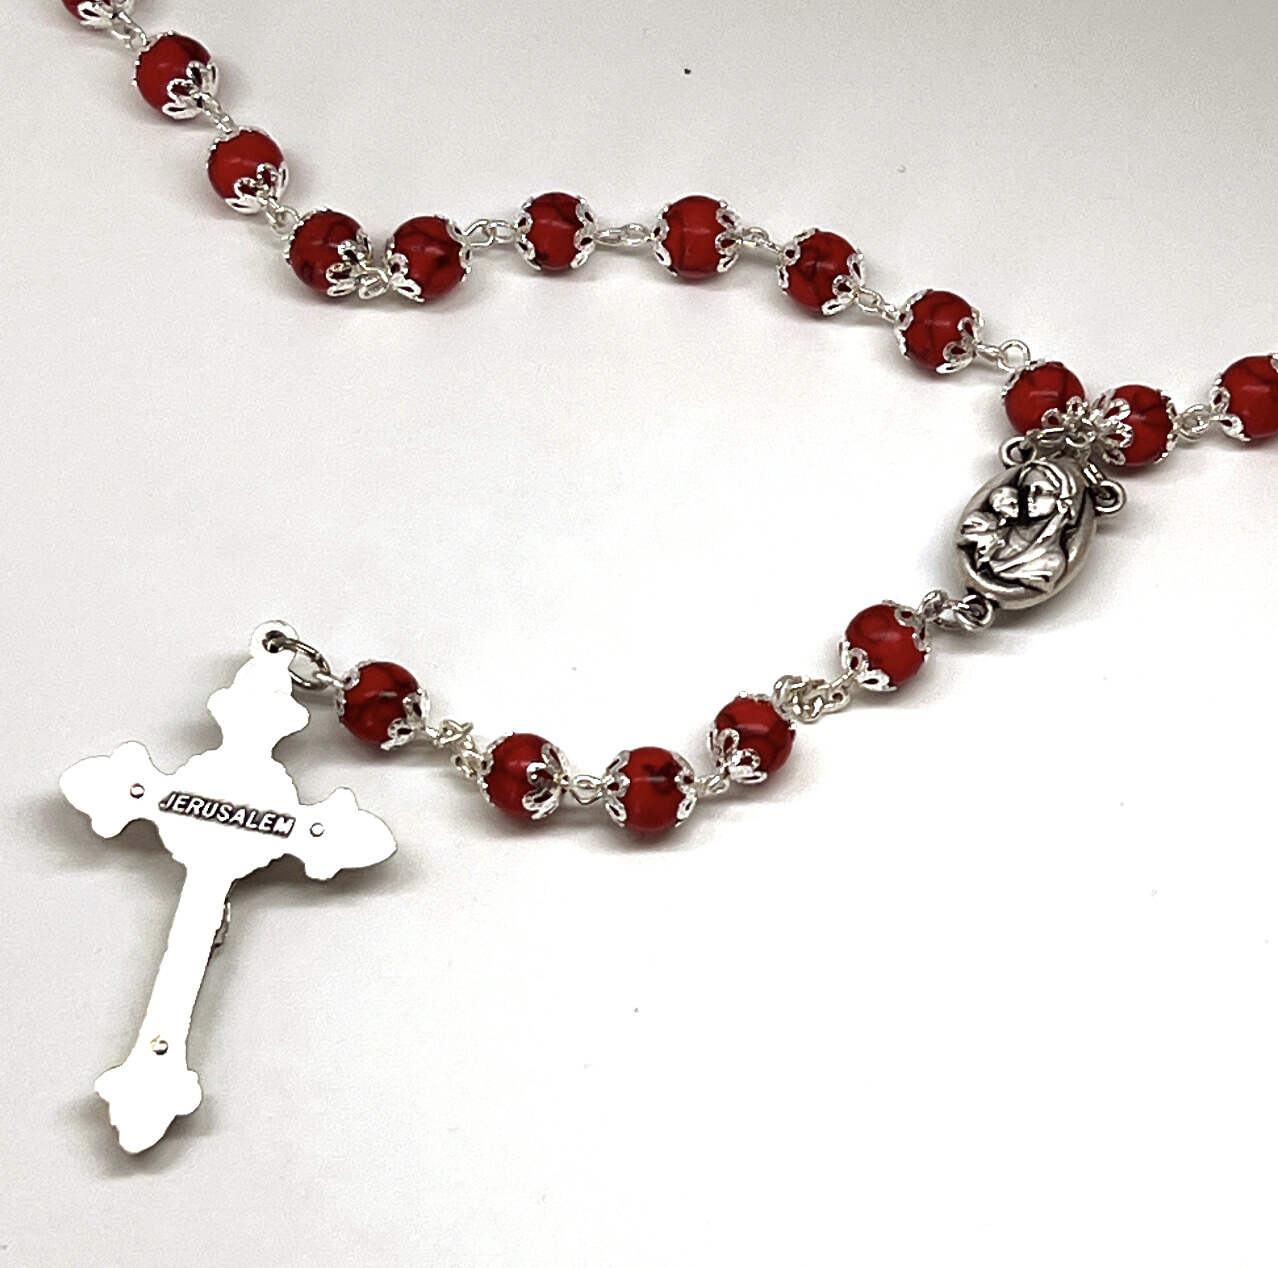 Rosary with Red Stone Beads, Metal Chain and 2" Crucifix, Made with Holy Land Coral Stone Beads